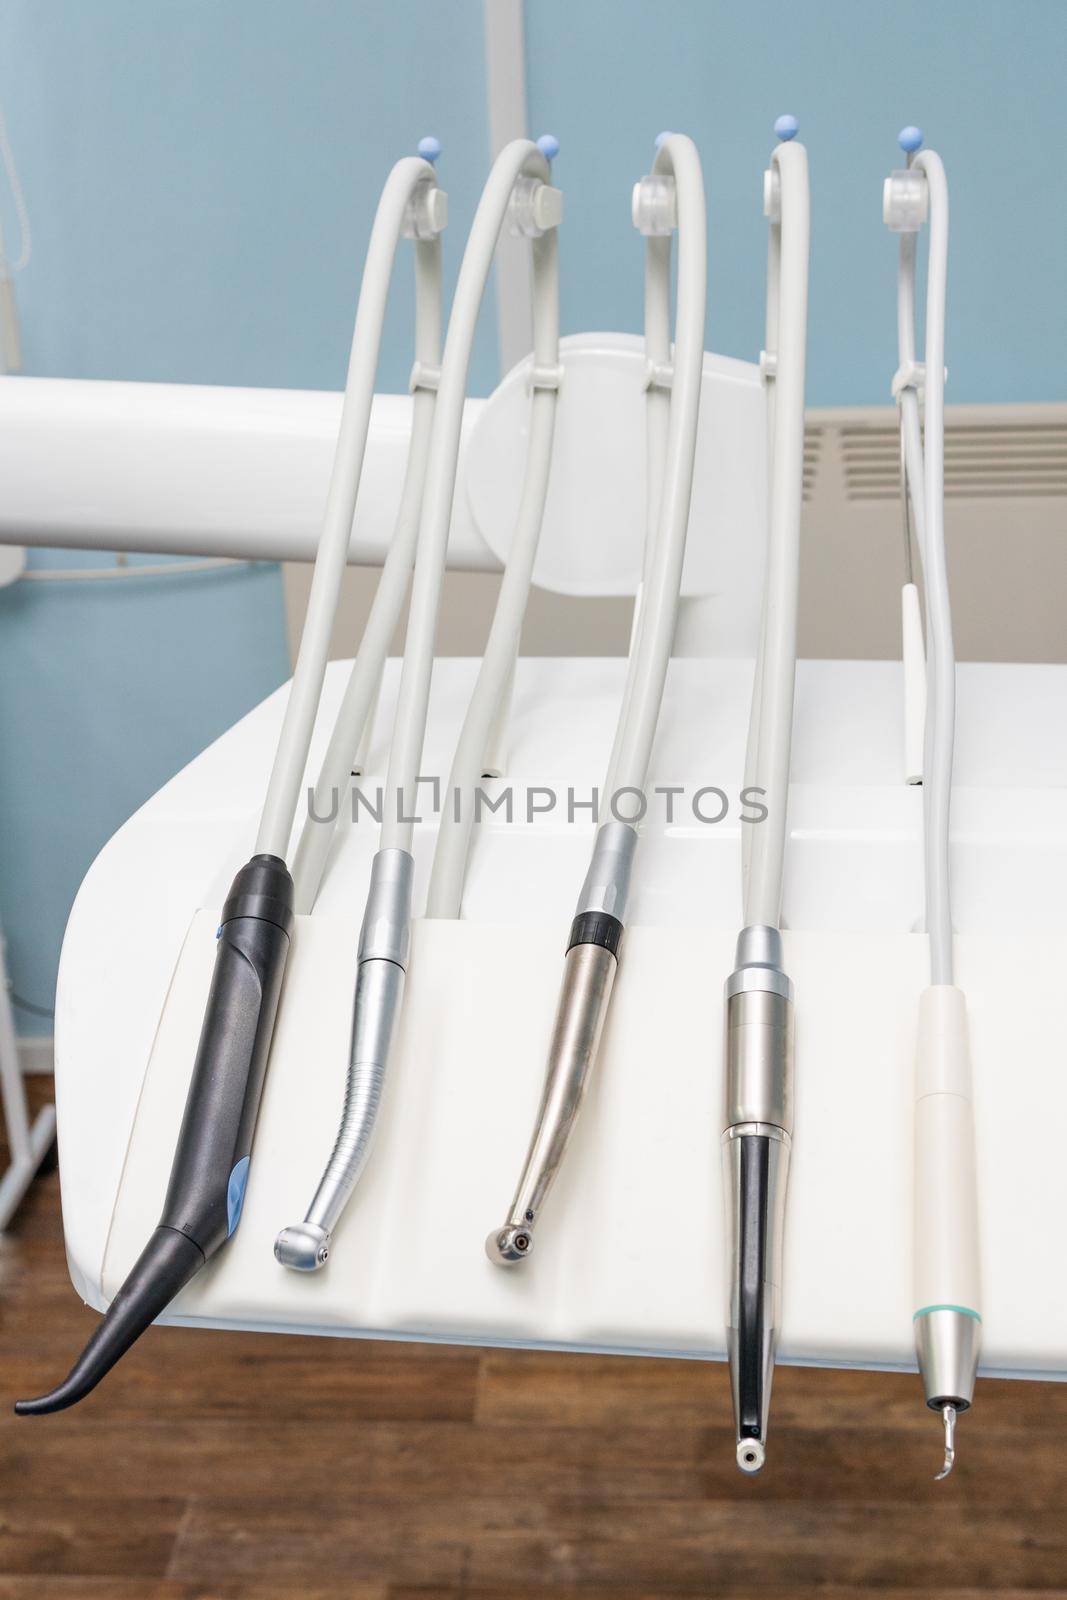 in the dental office there is a mobile table with drills and other dental instruments that are part of the dental unit by olex